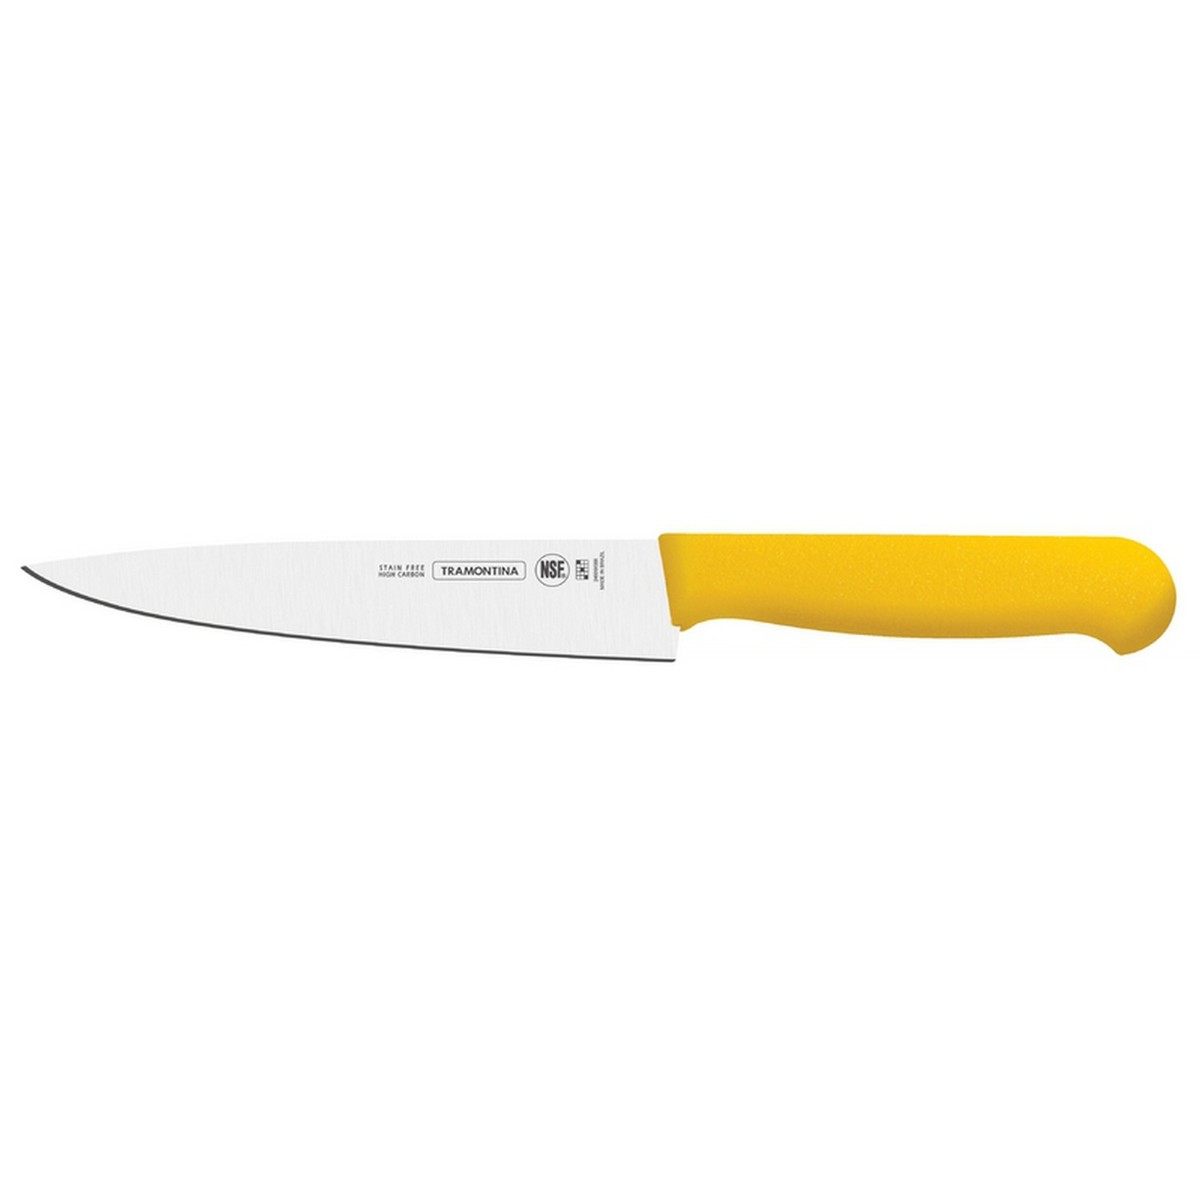 Tramontina Meat Knife YW-24620/158 8inch